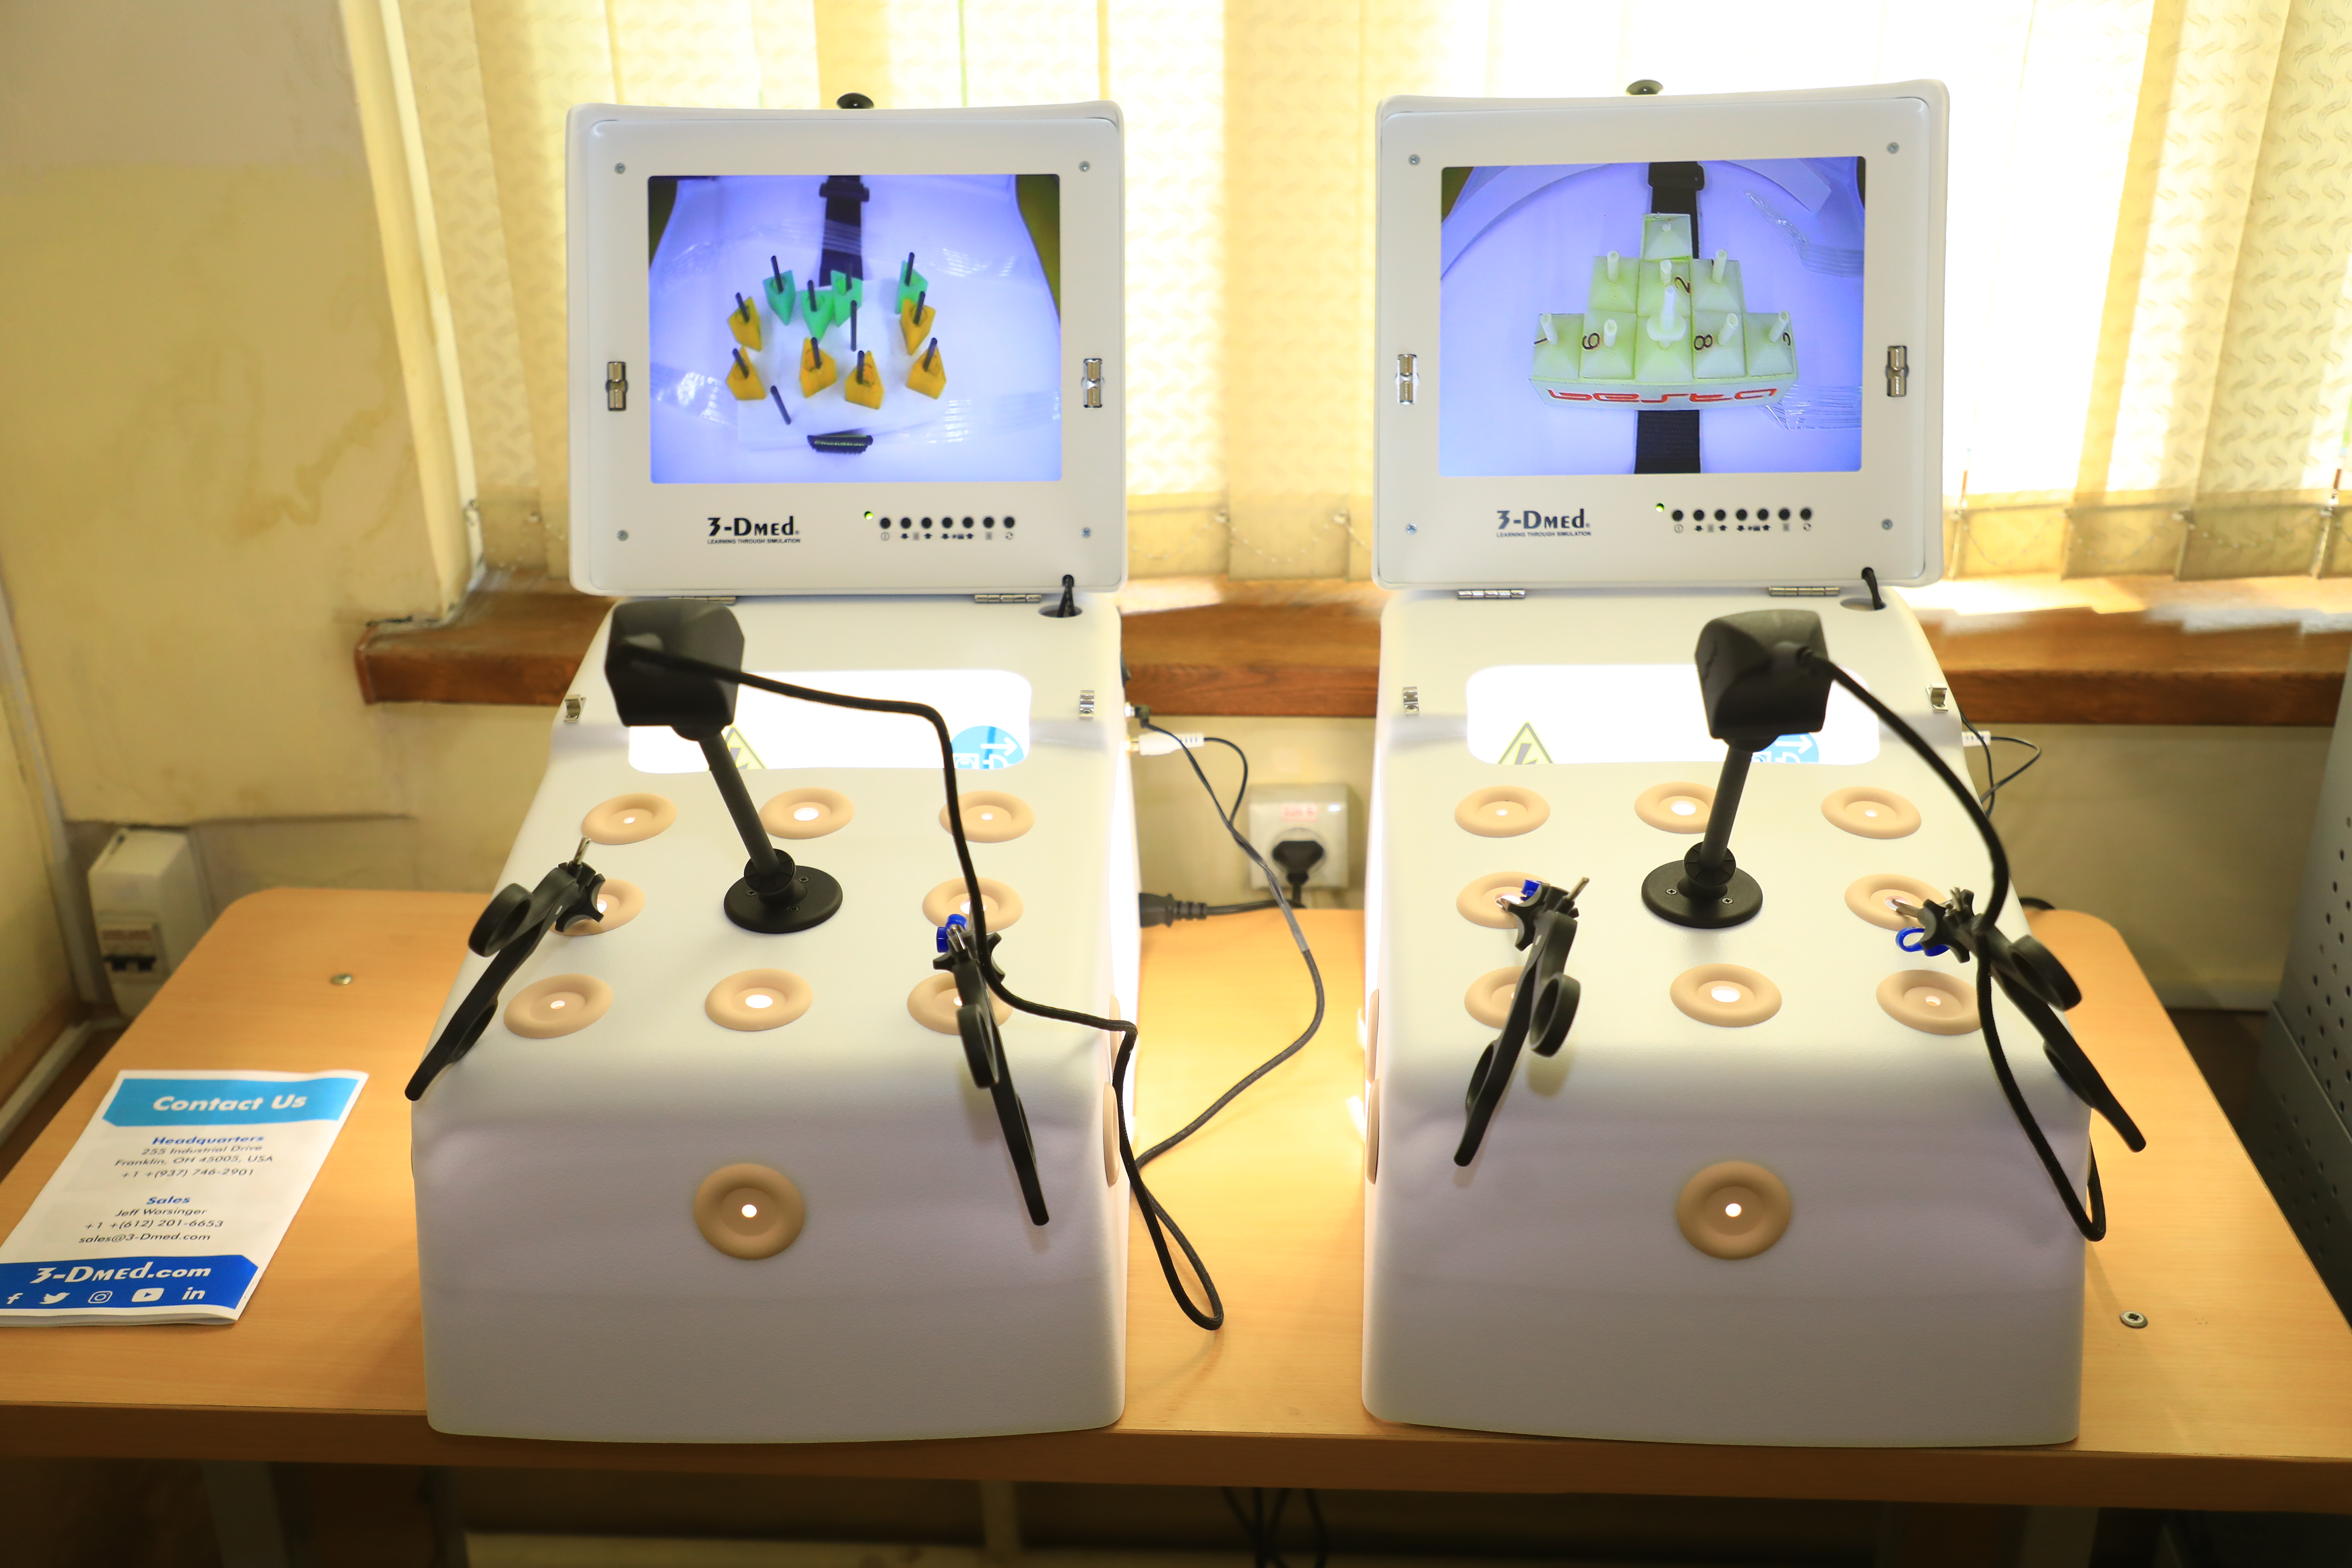 NEW EQUIPMENT WAS INSTALLED IN SIMULATION TRAINING CENTER OF OUR INSTITUTE